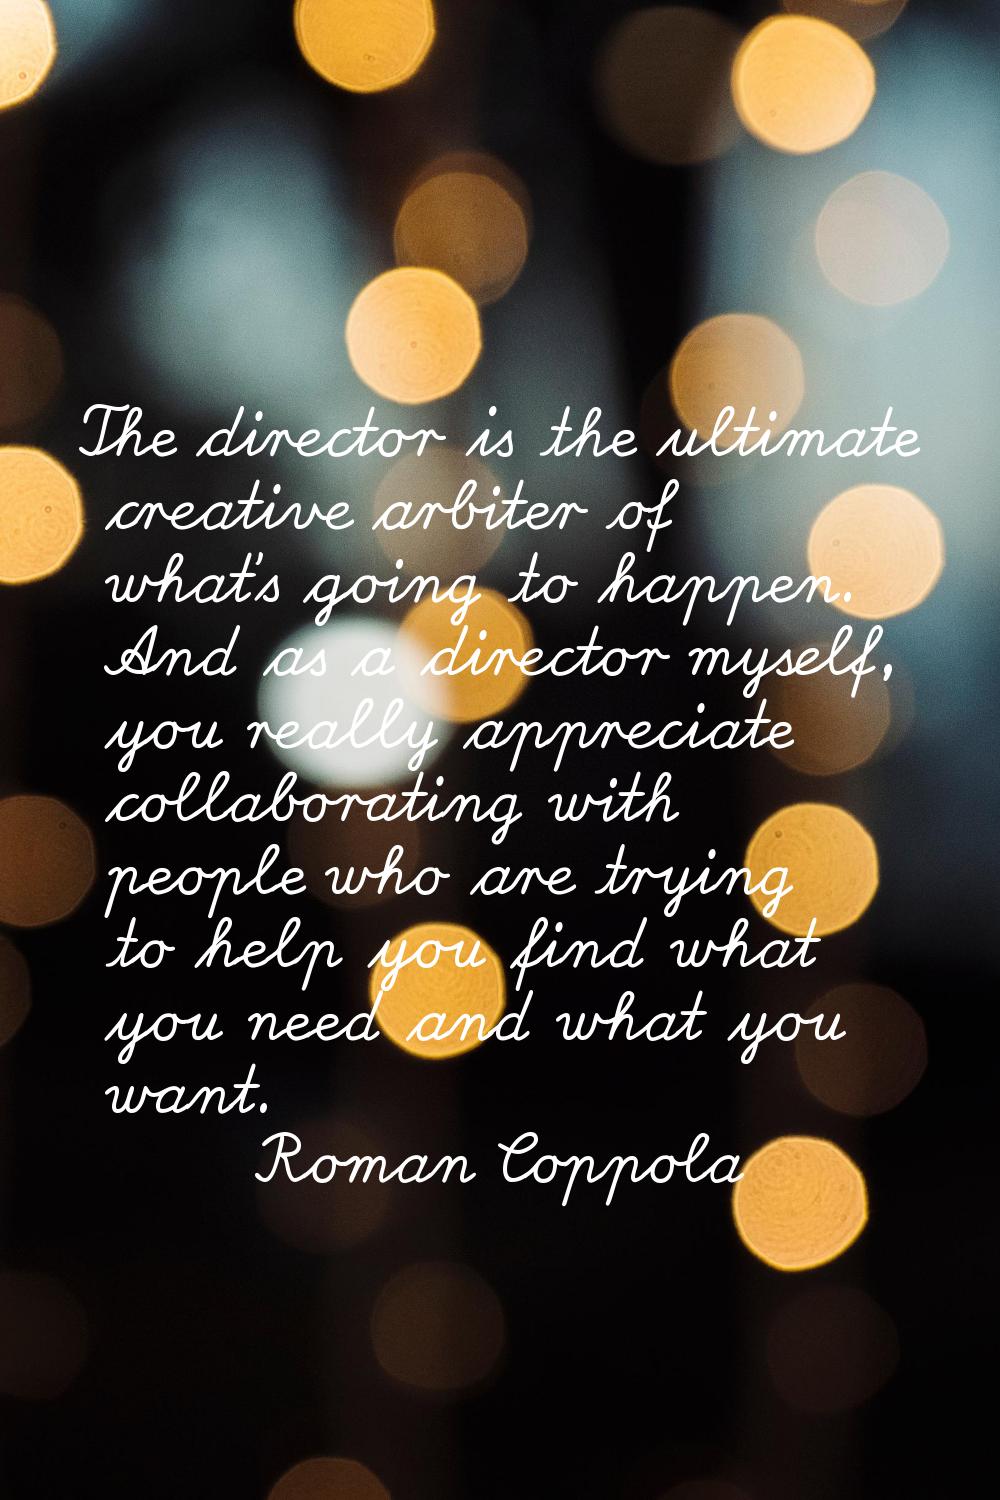 The director is the ultimate creative arbiter of what's going to happen. And as a director myself, 